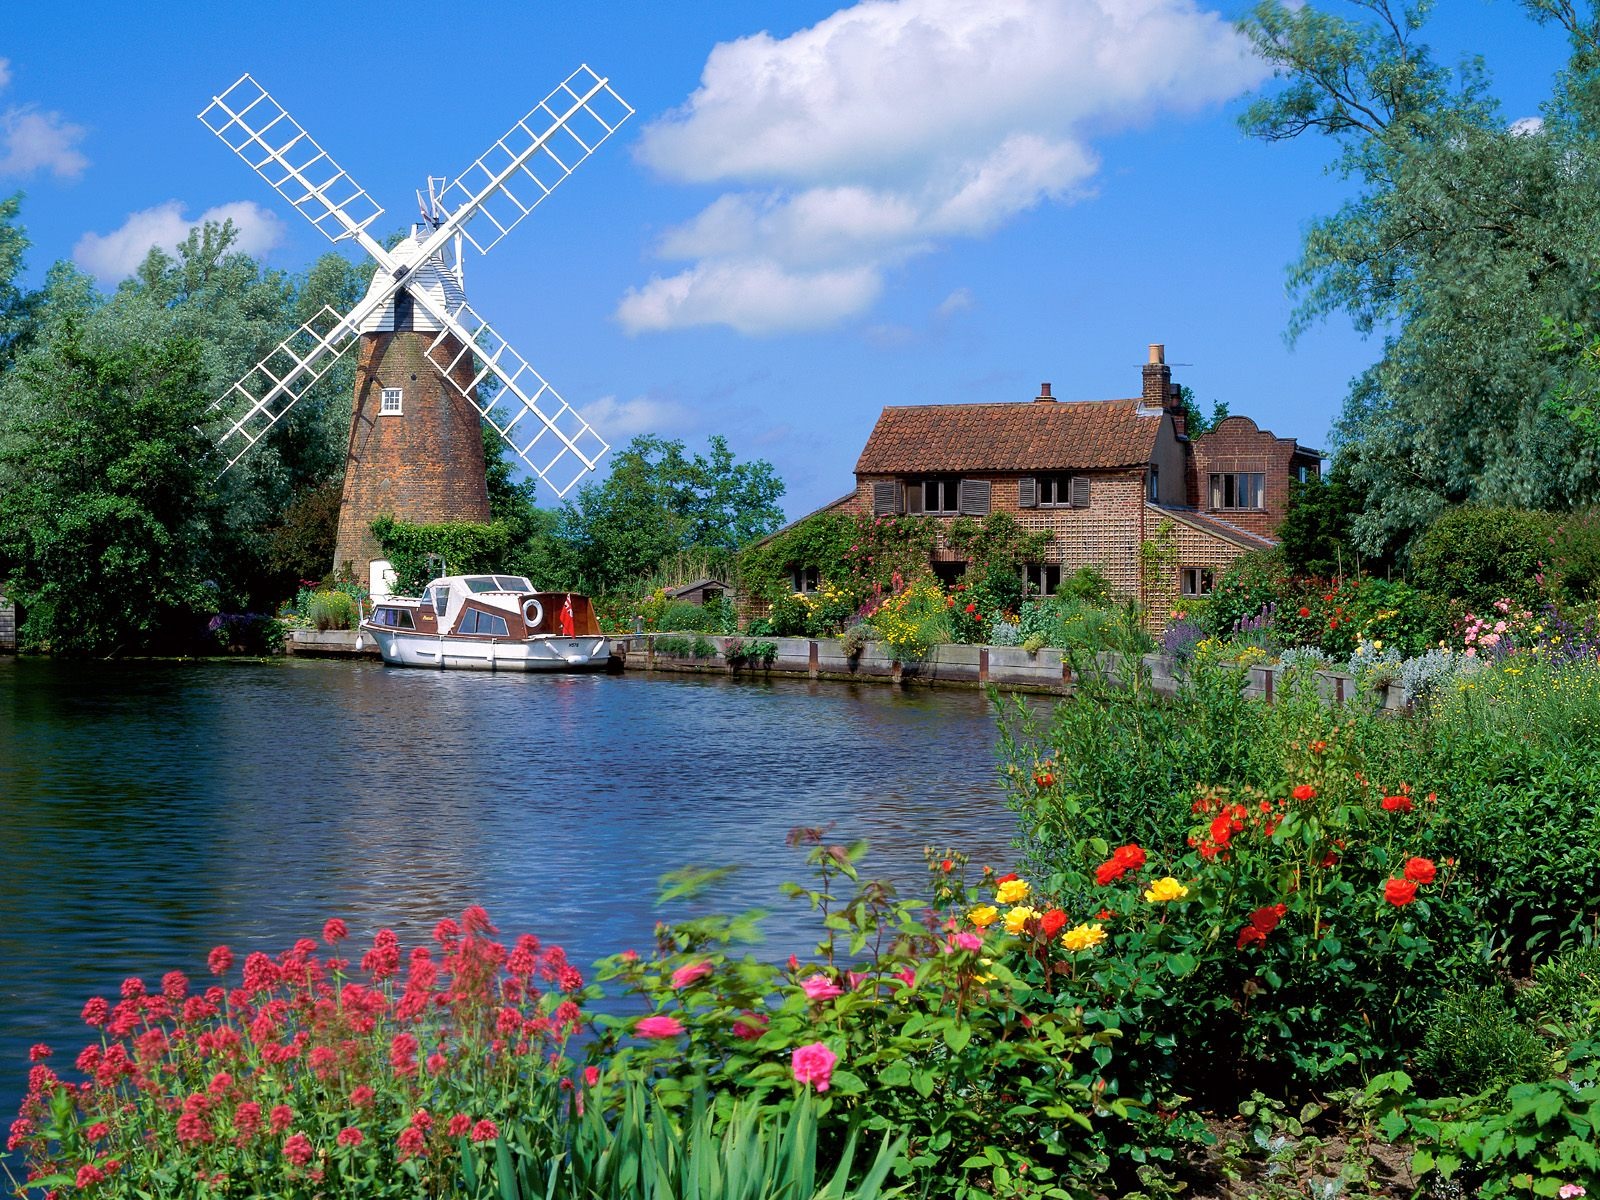 World scenery of England Wallpapers #5 - 1600x1200